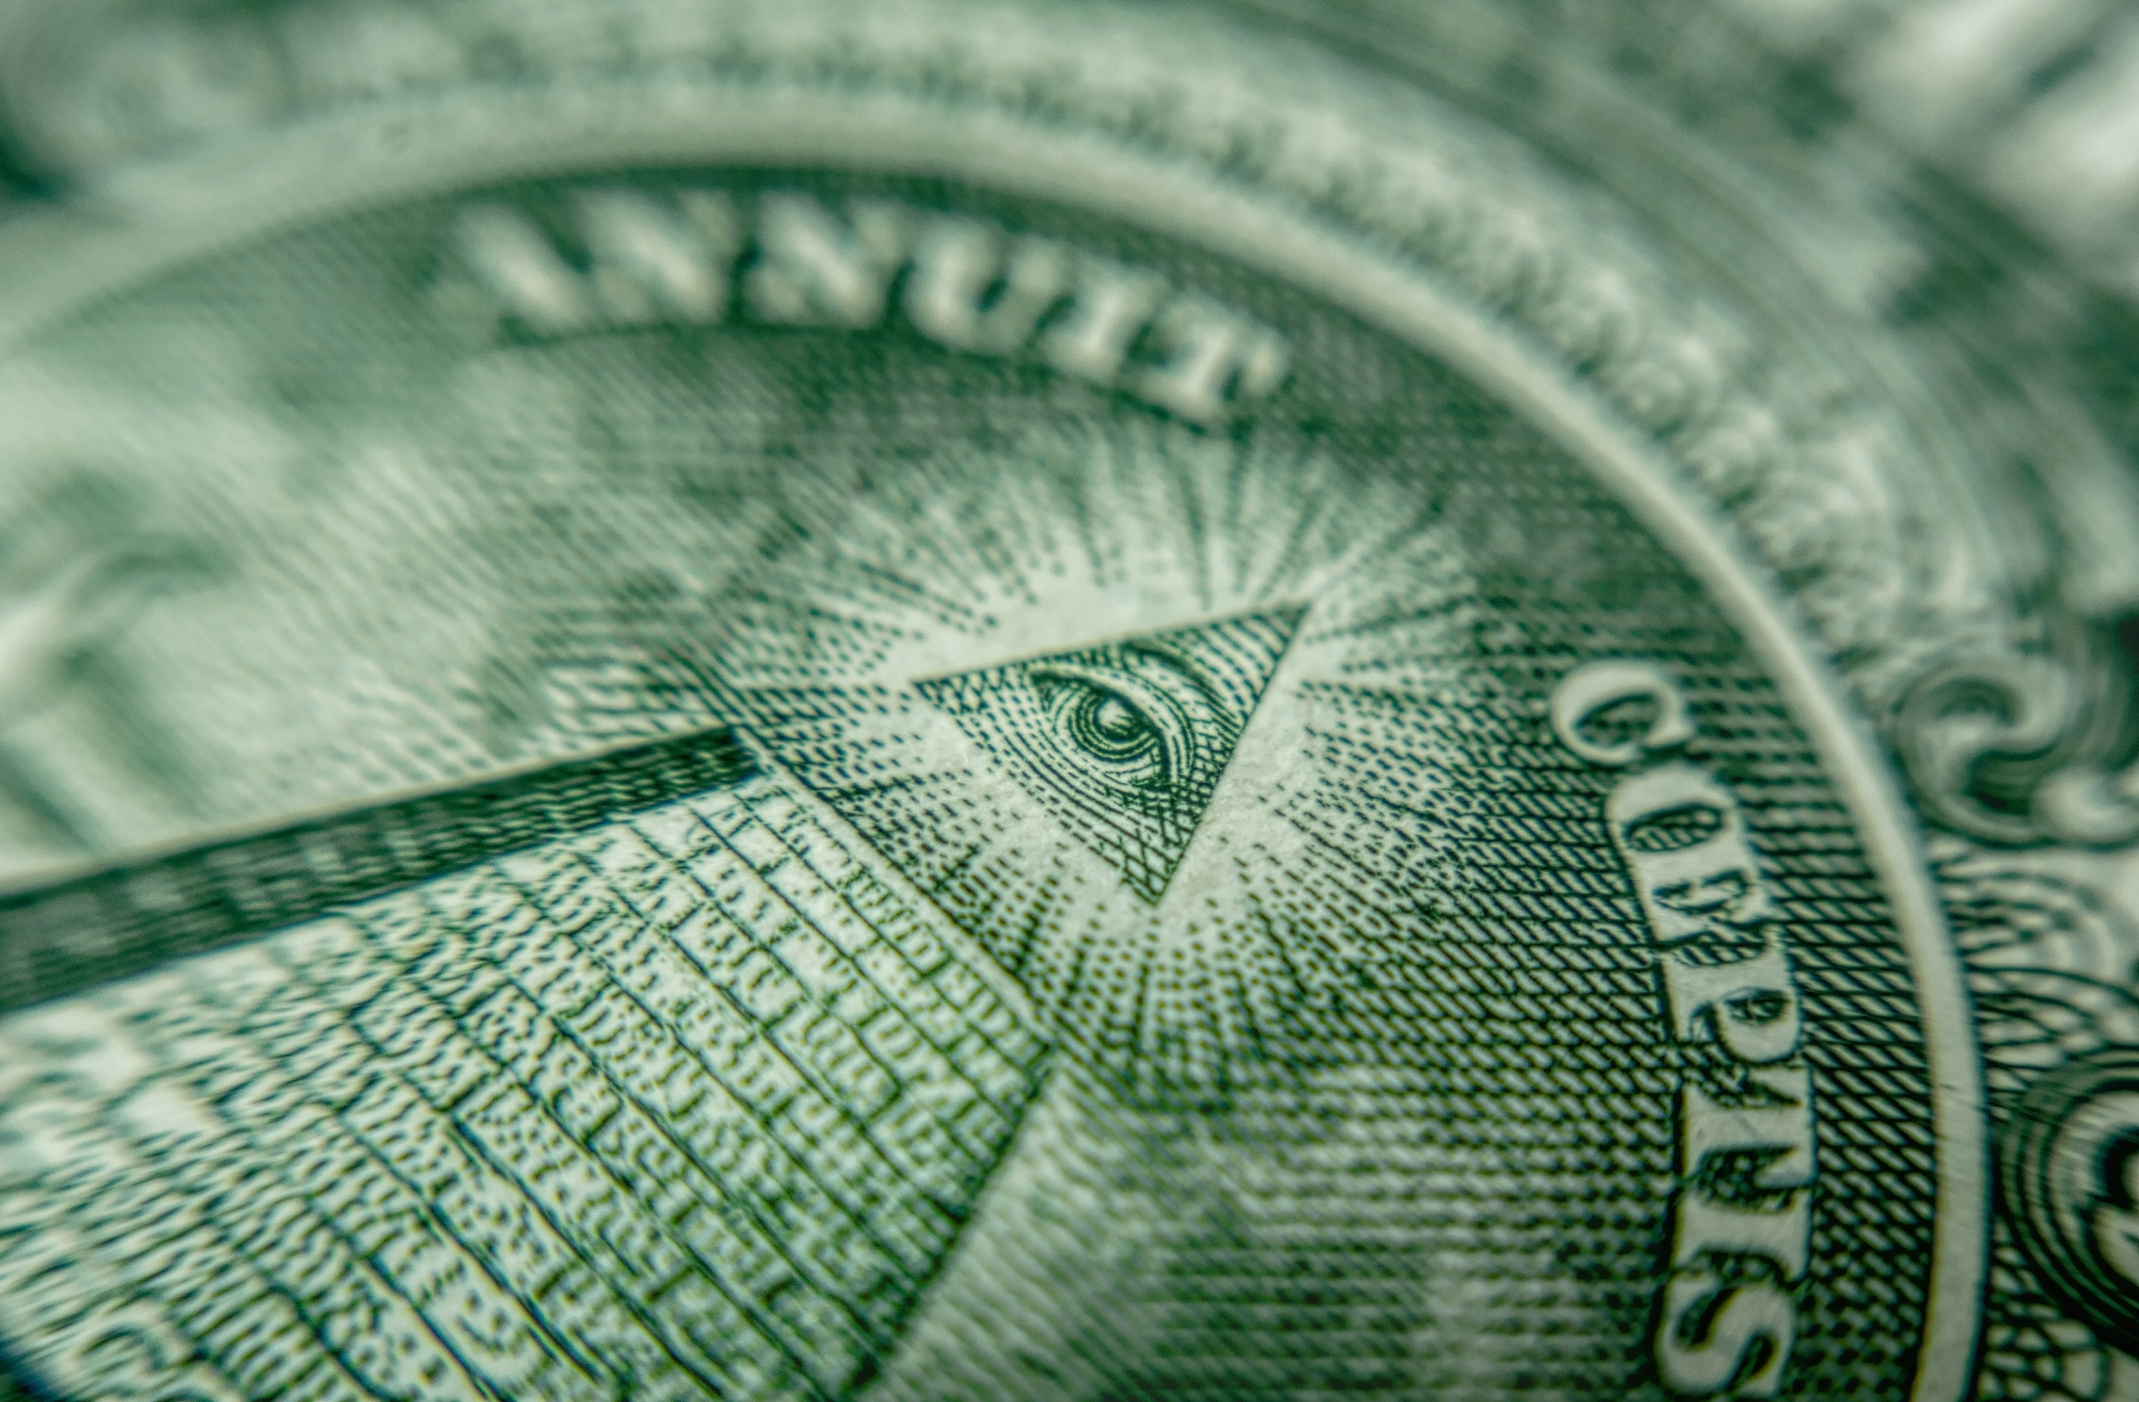 Close-up of eye and pyramid on the American dollar bill involved in the new global minimum tax plan